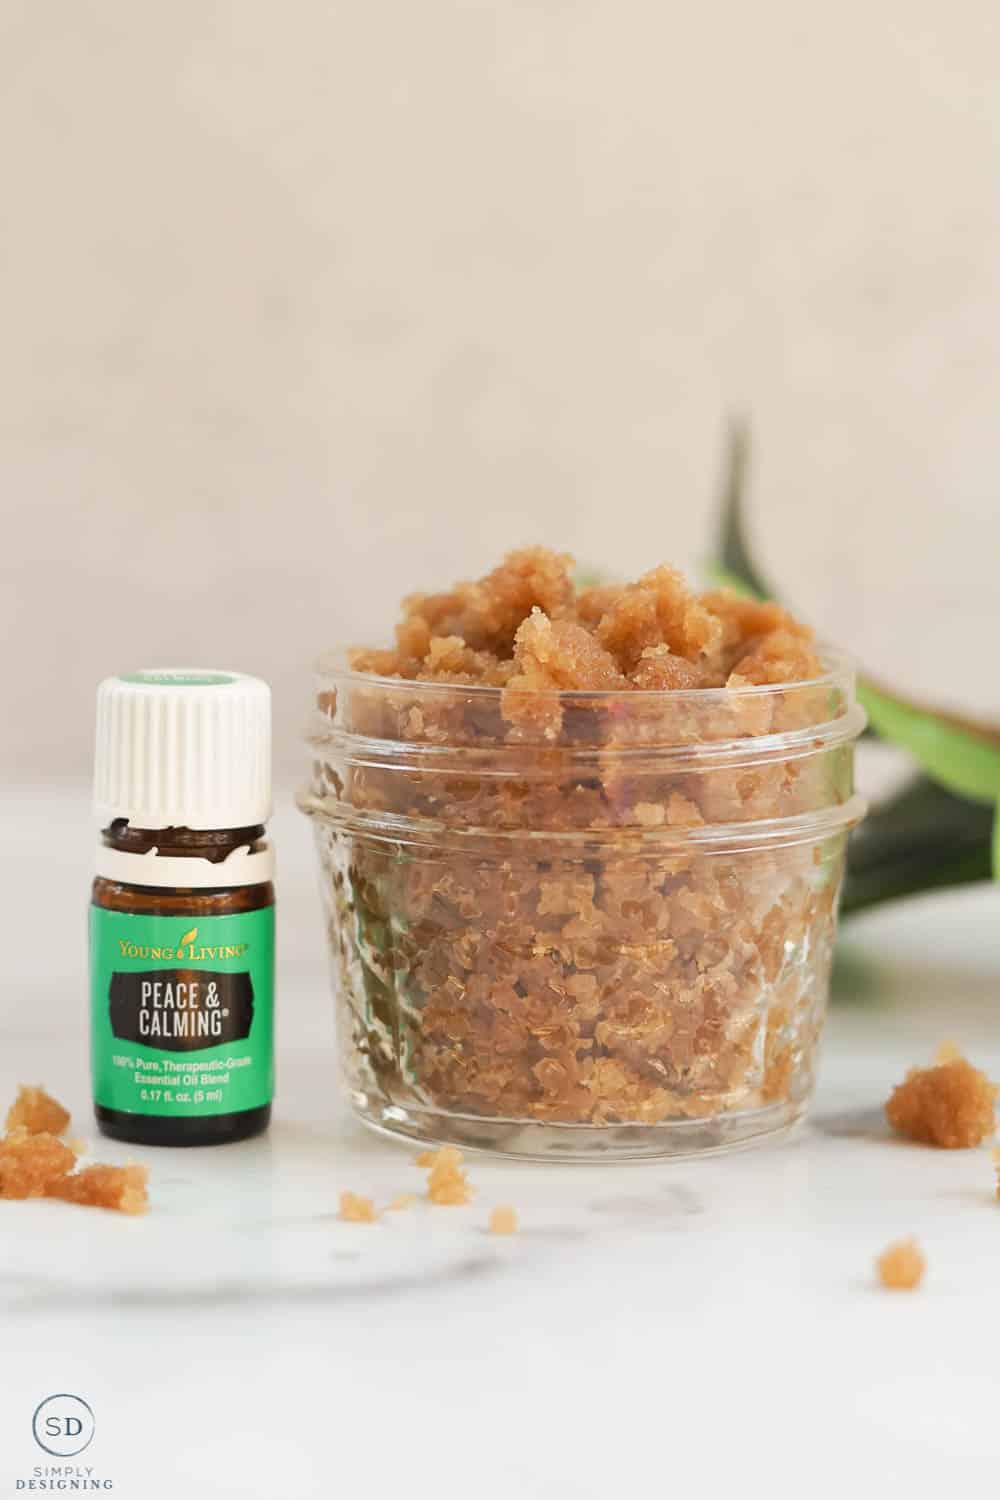 homemade brown sugar scrub in a small ball glass jar with peace and calming esential oil and greenery in the background